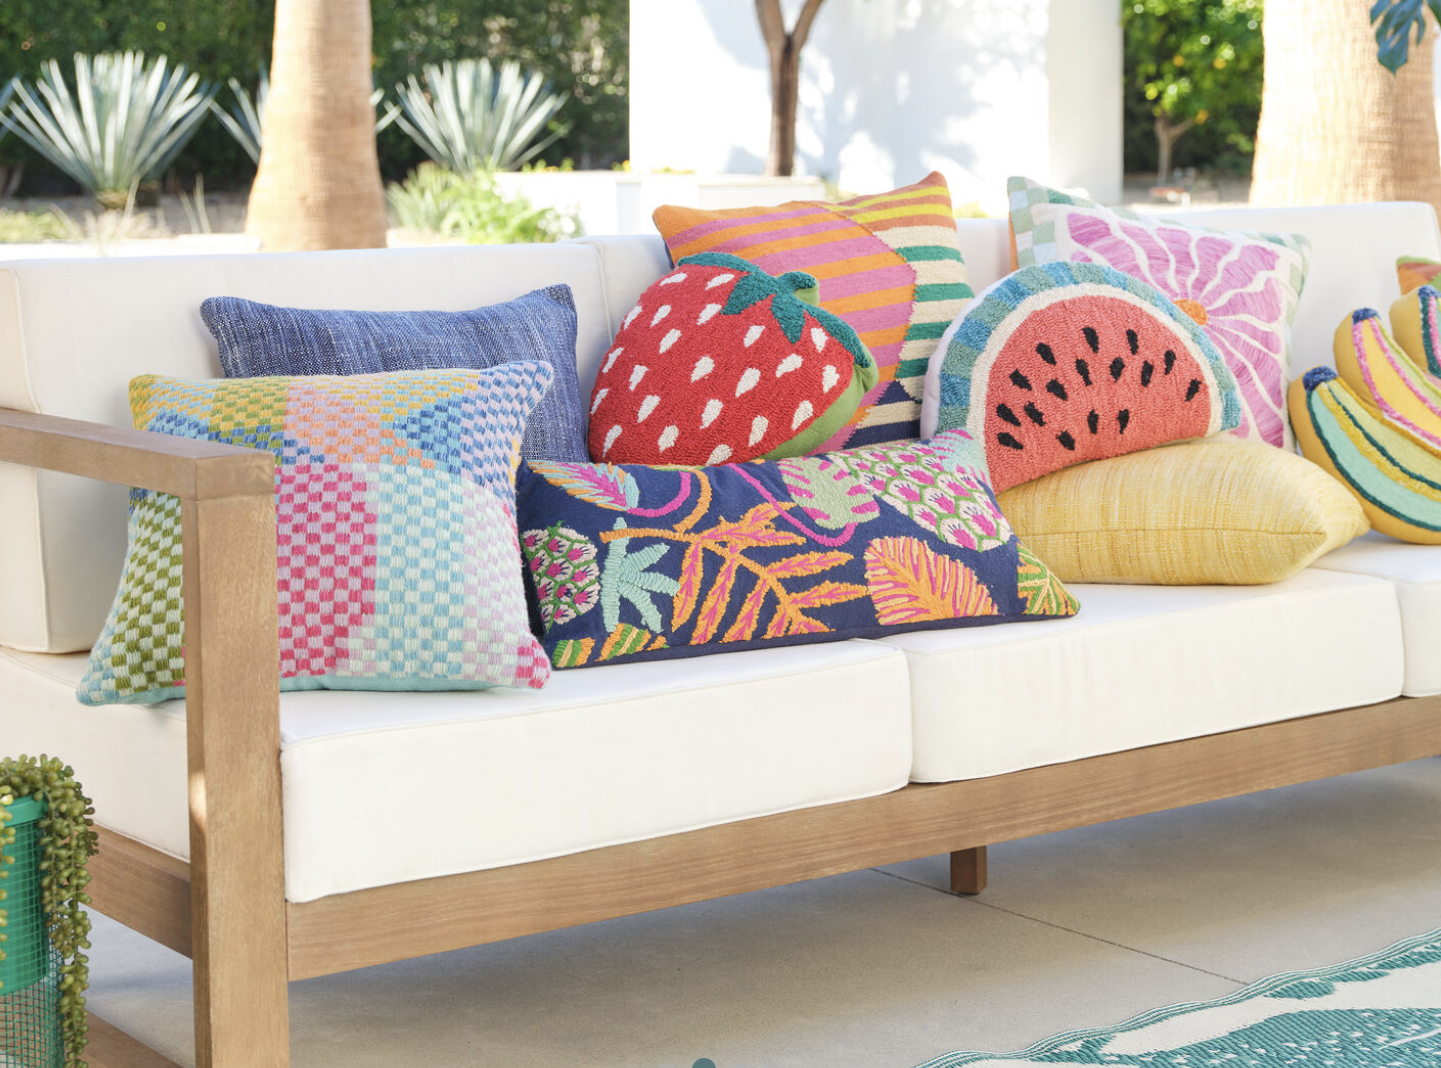 Fun outdoor pillows and cushions give off a happy vibe without worrying if rain or spills happen. interior designer and builder troutman nc